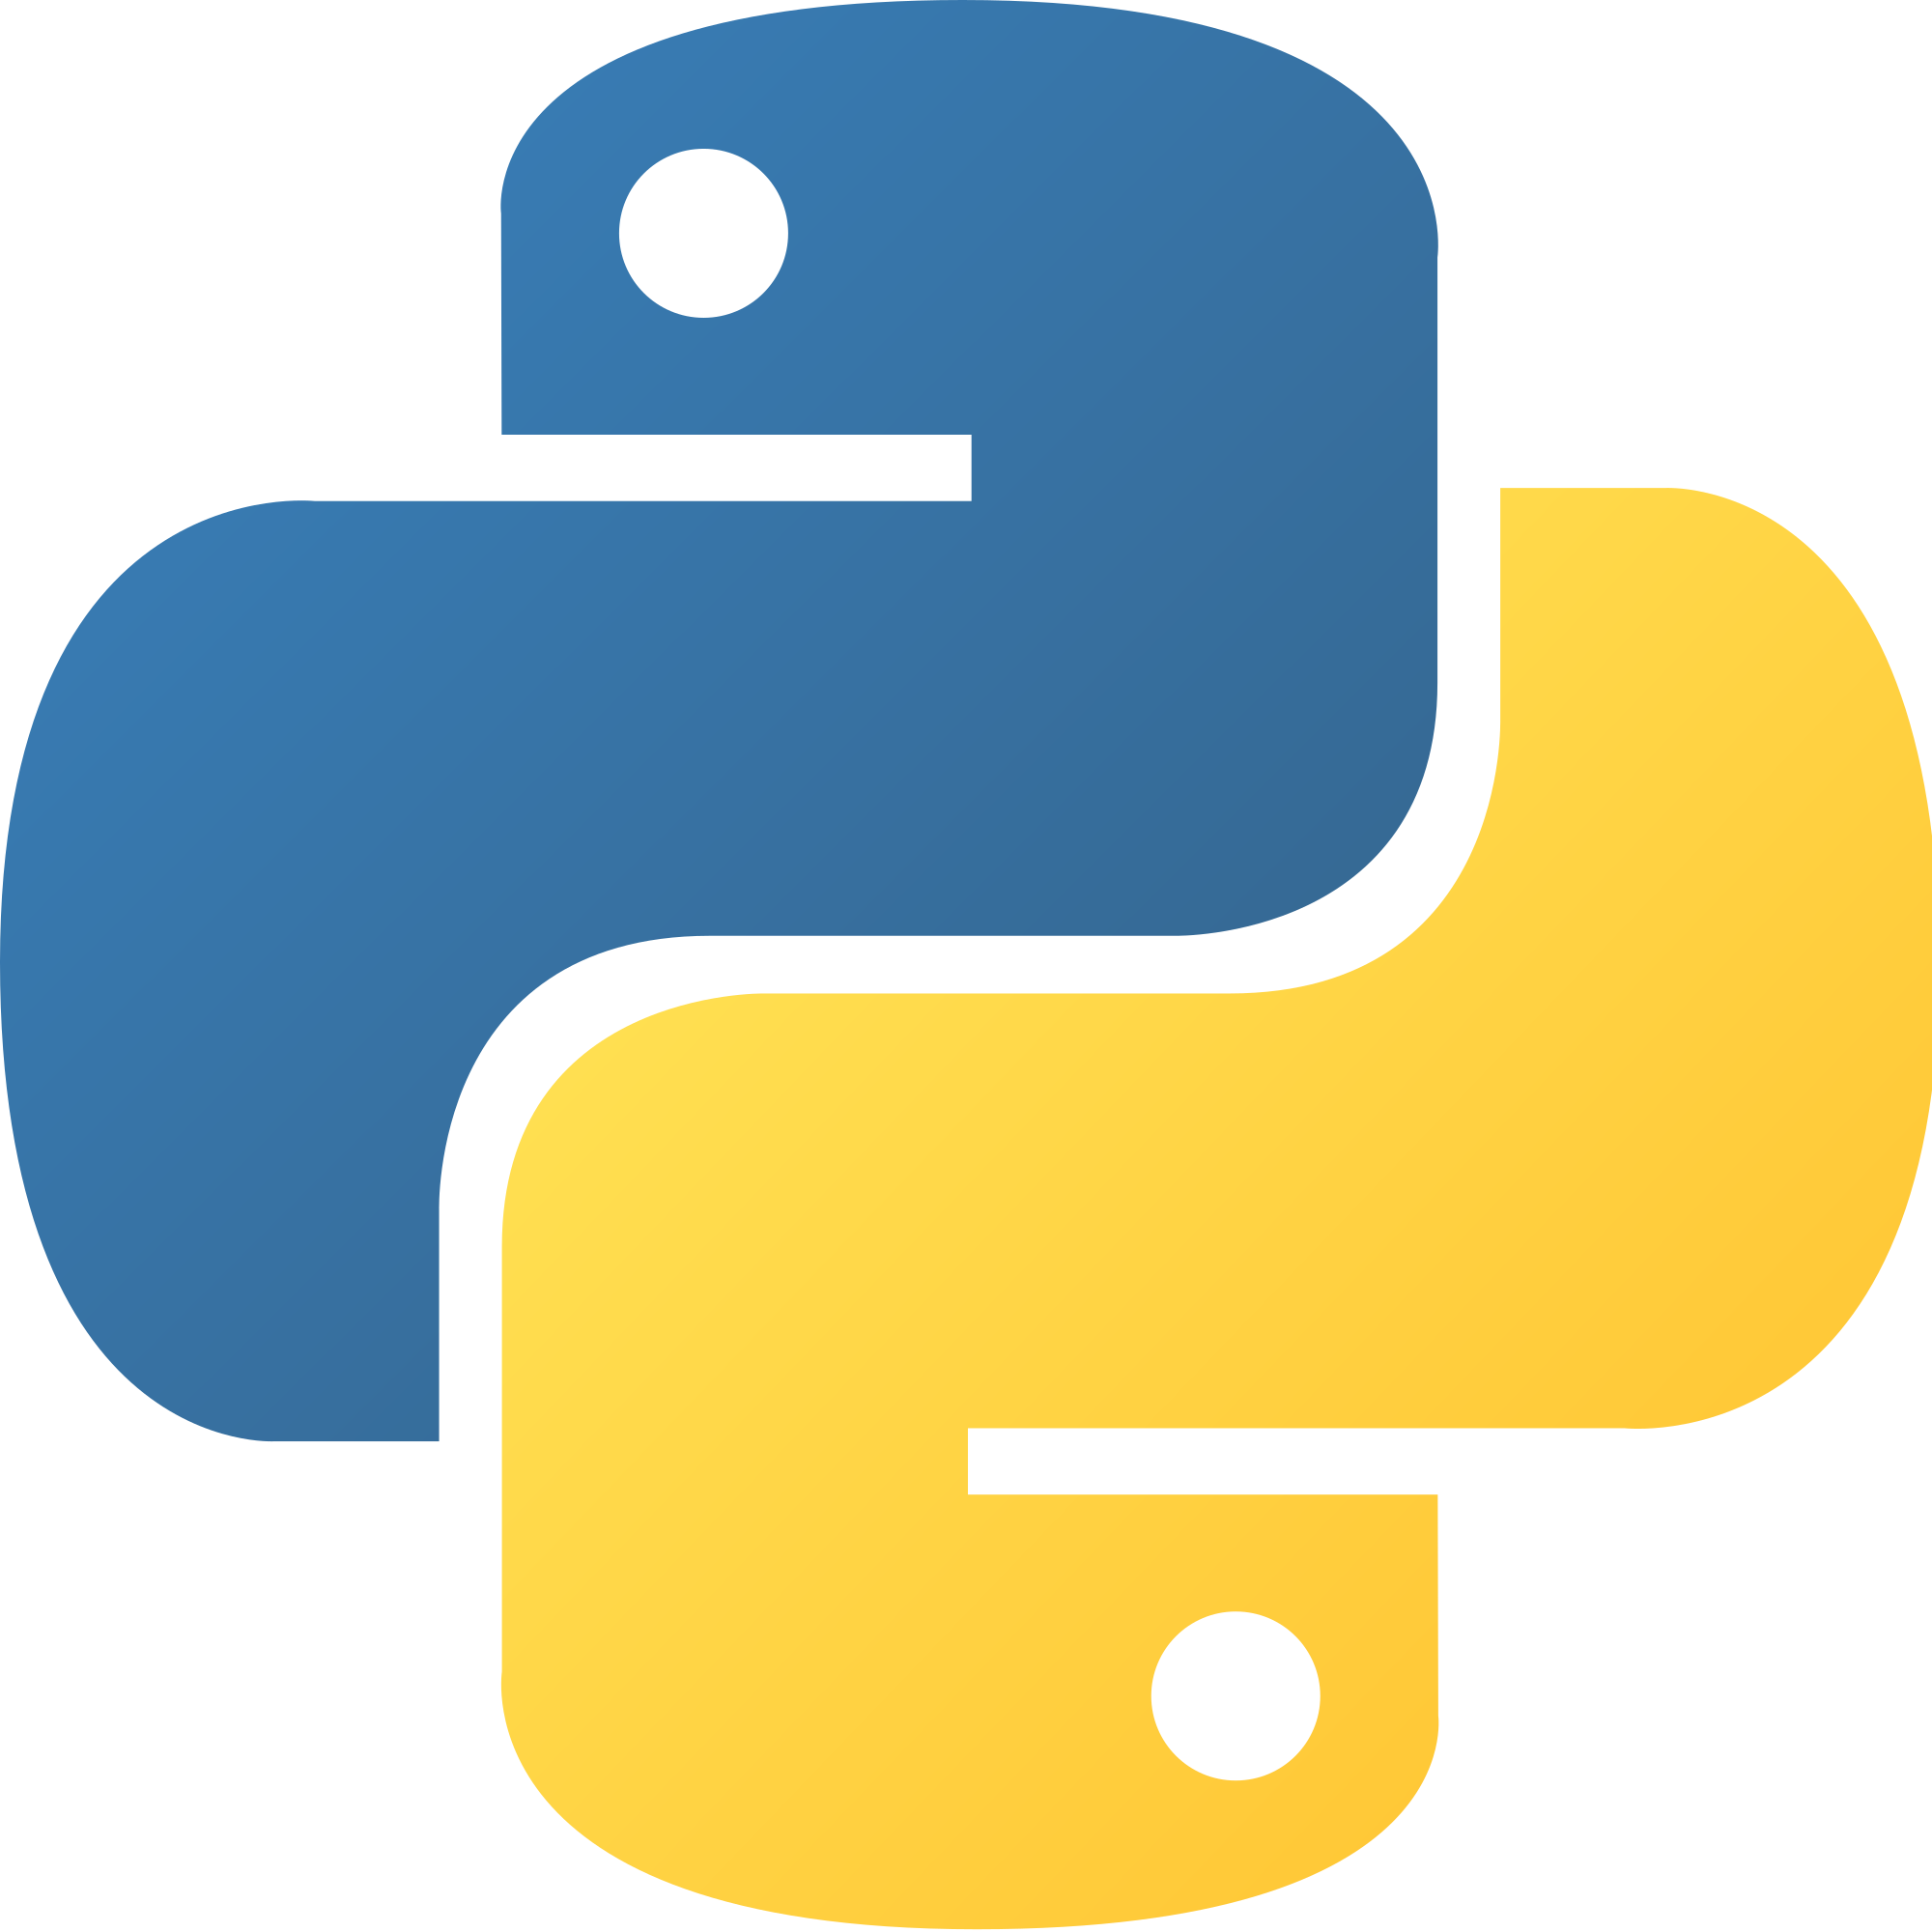 Python in production engineering - Facebook Engineering